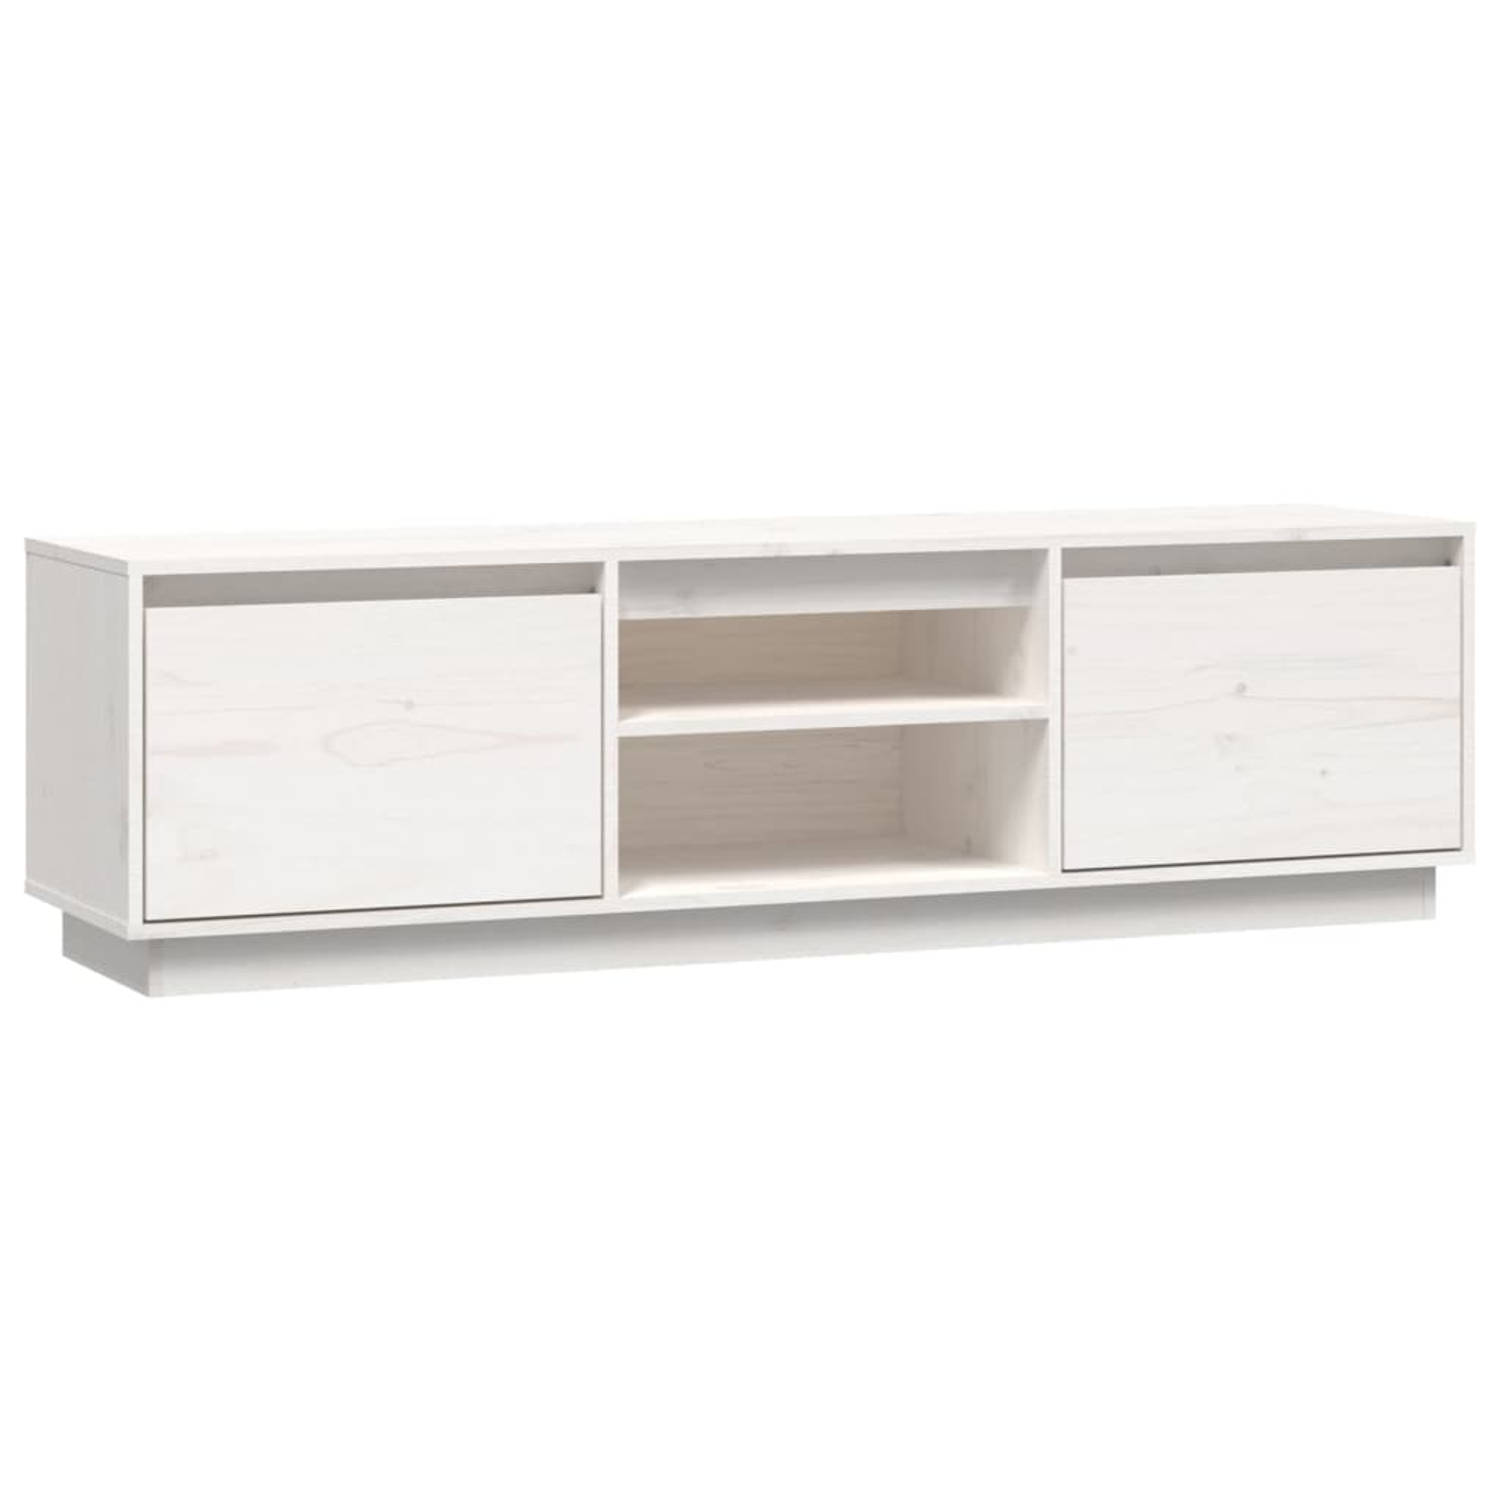 The Living Store Tv-meubel - Grenenhout - 140 x 35 x 40 cm - Wit